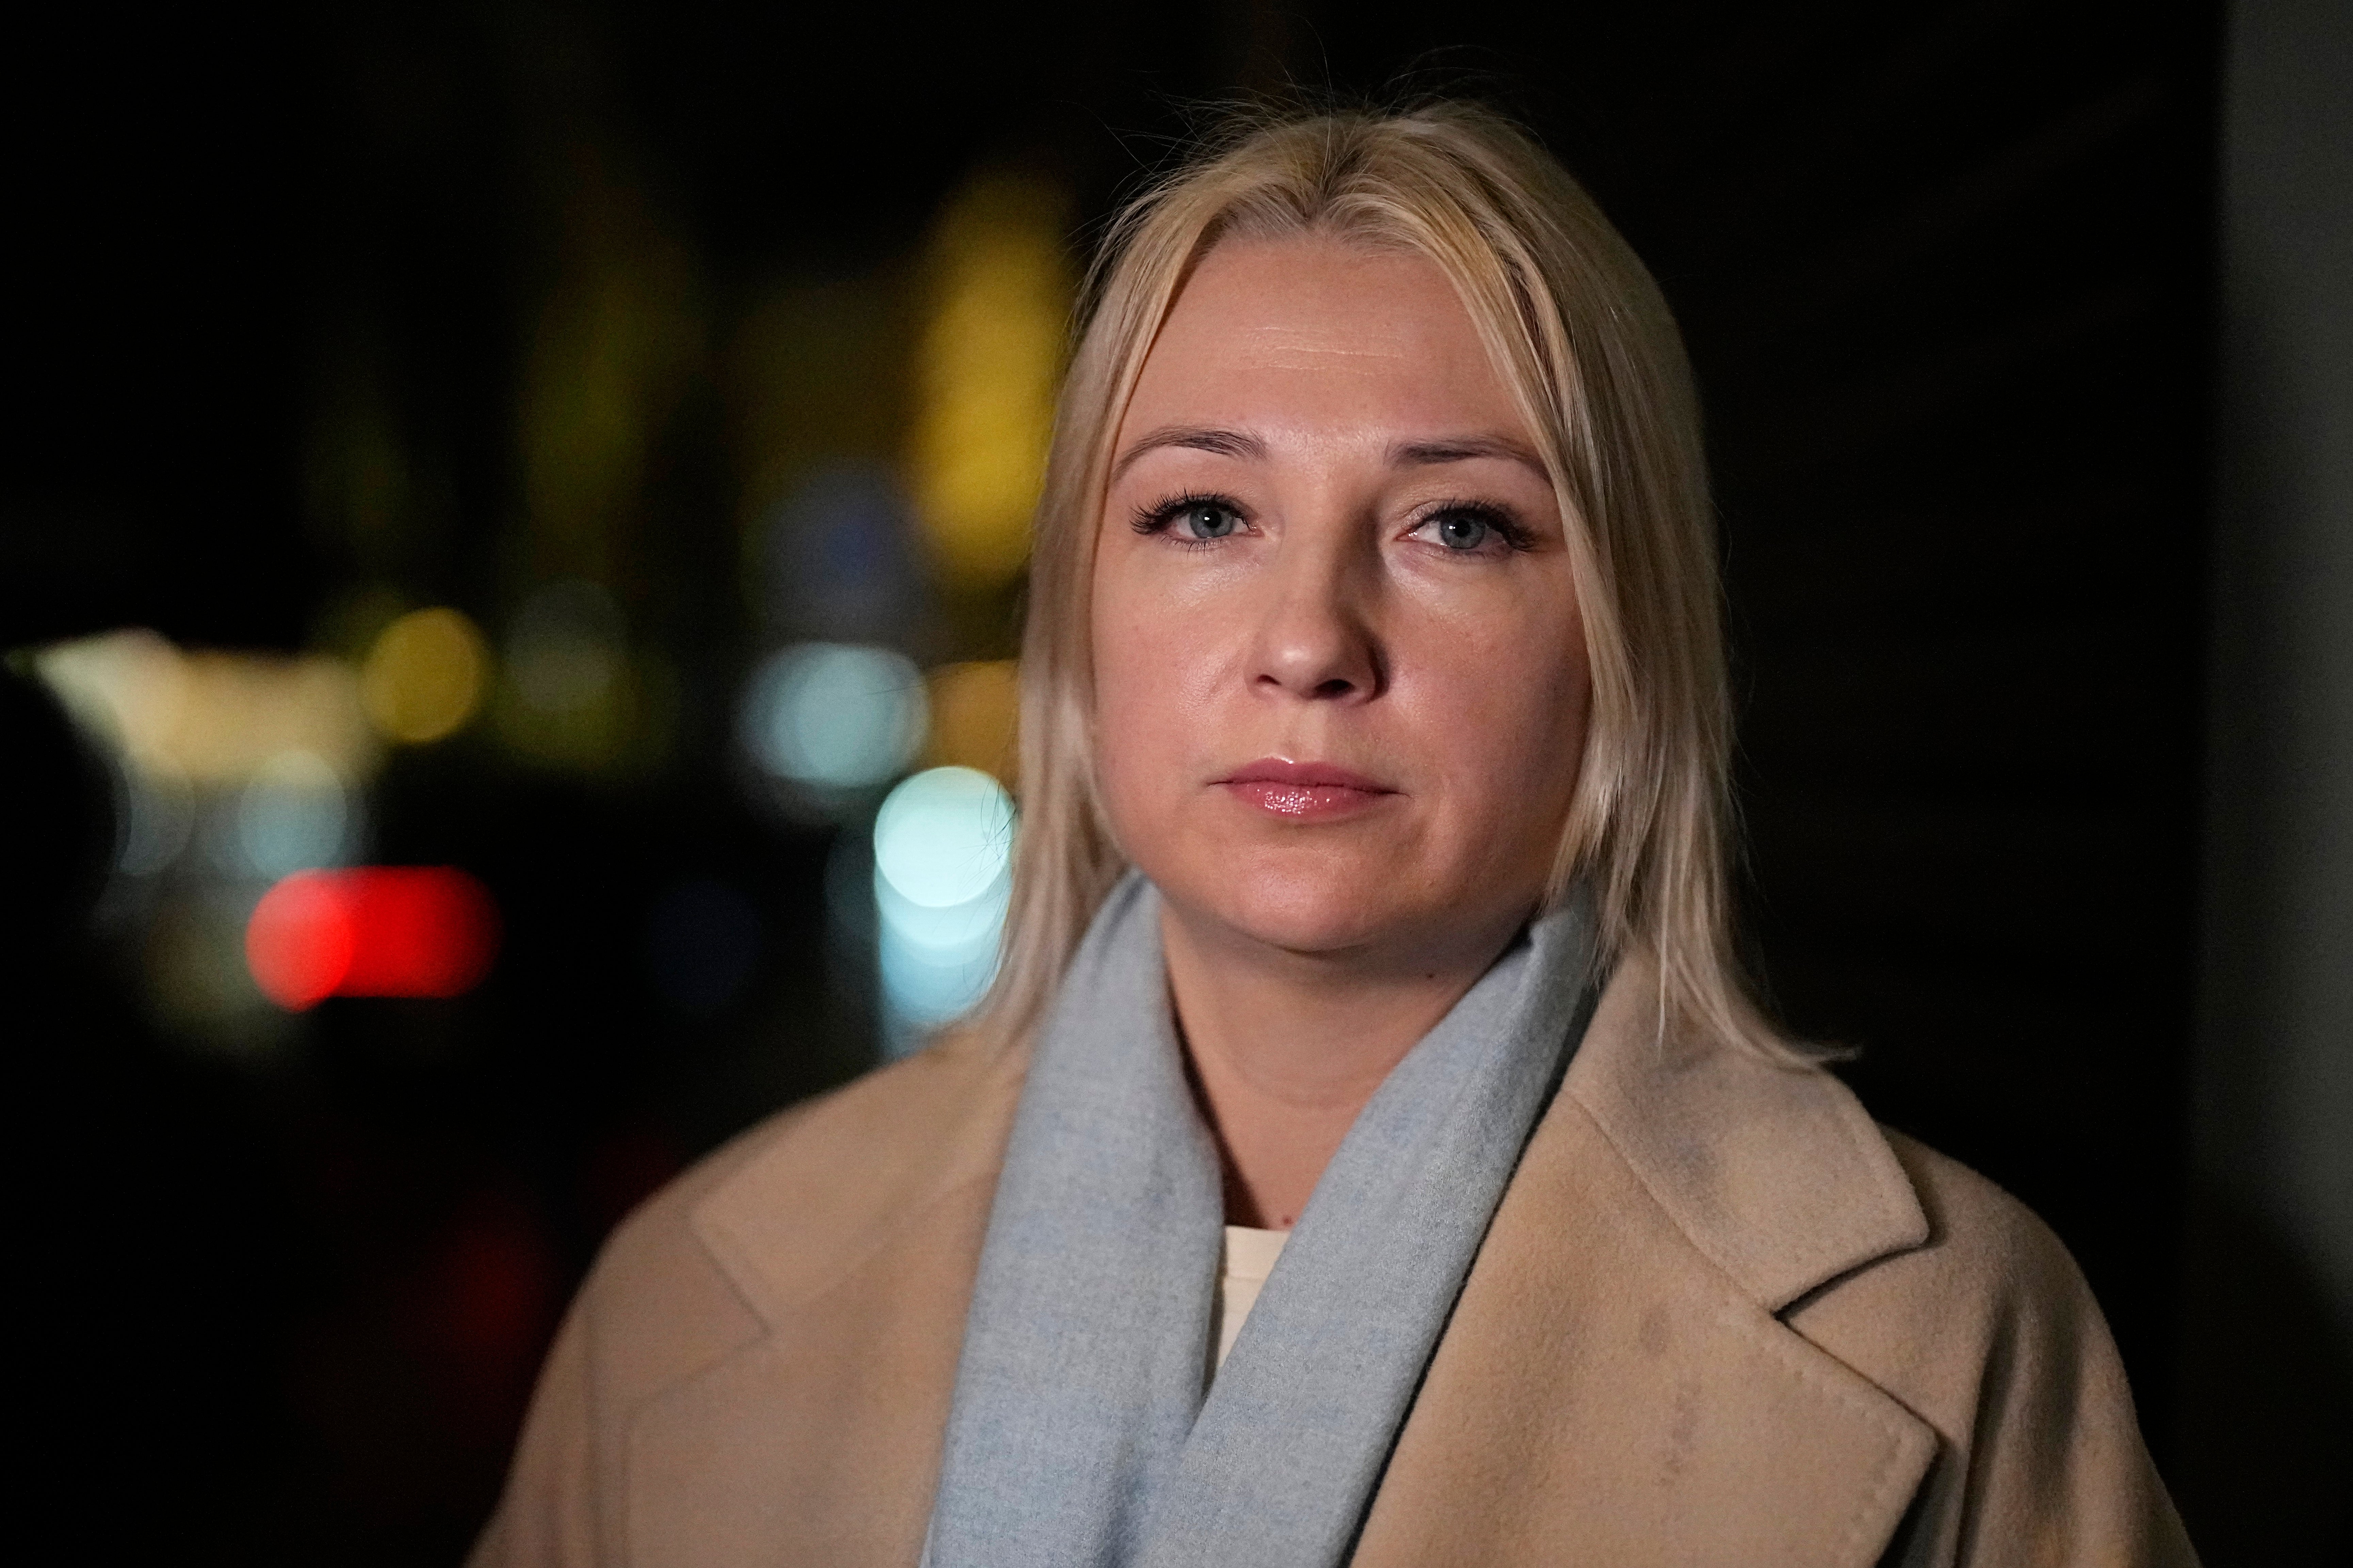 Yekatrina Duntsova, 40, was denied the opporunity to stand in the Russian presidential election